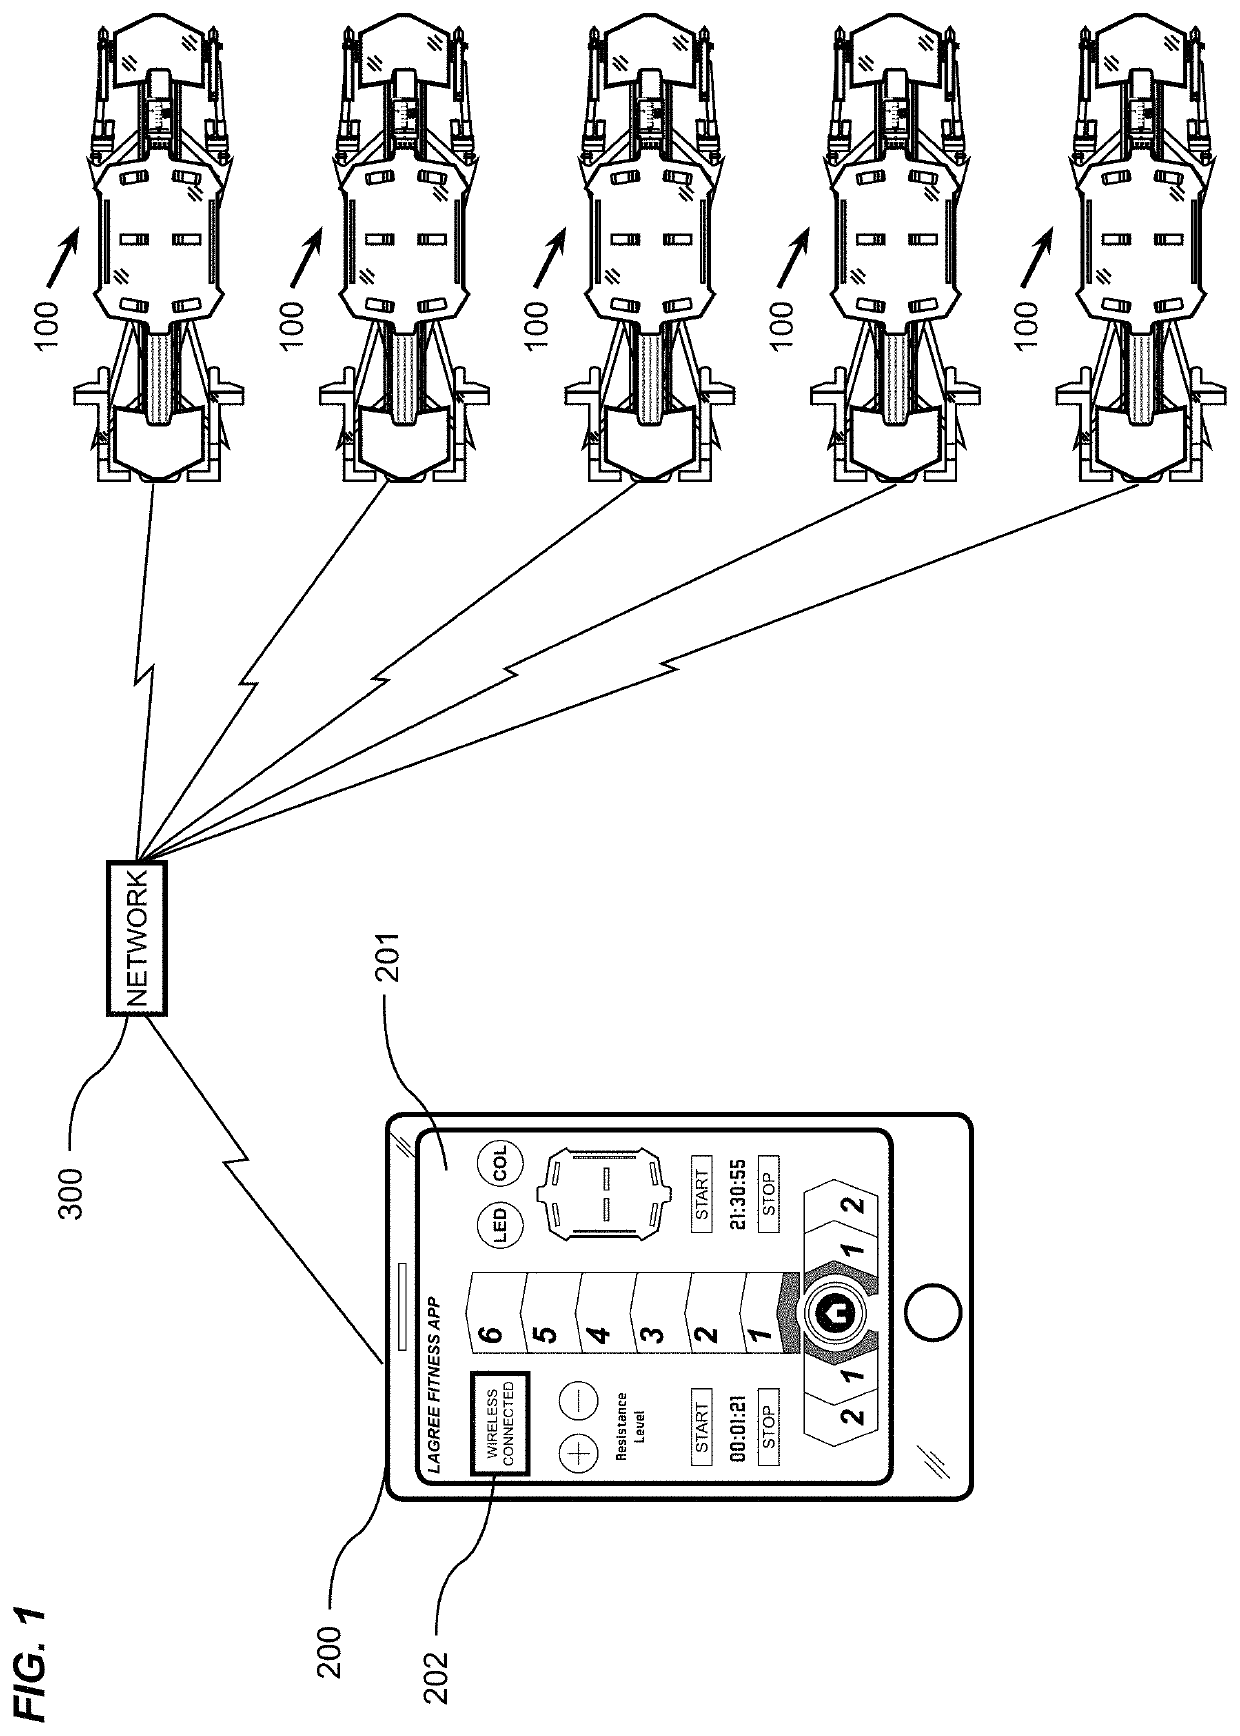 System and method for networking fitness machines